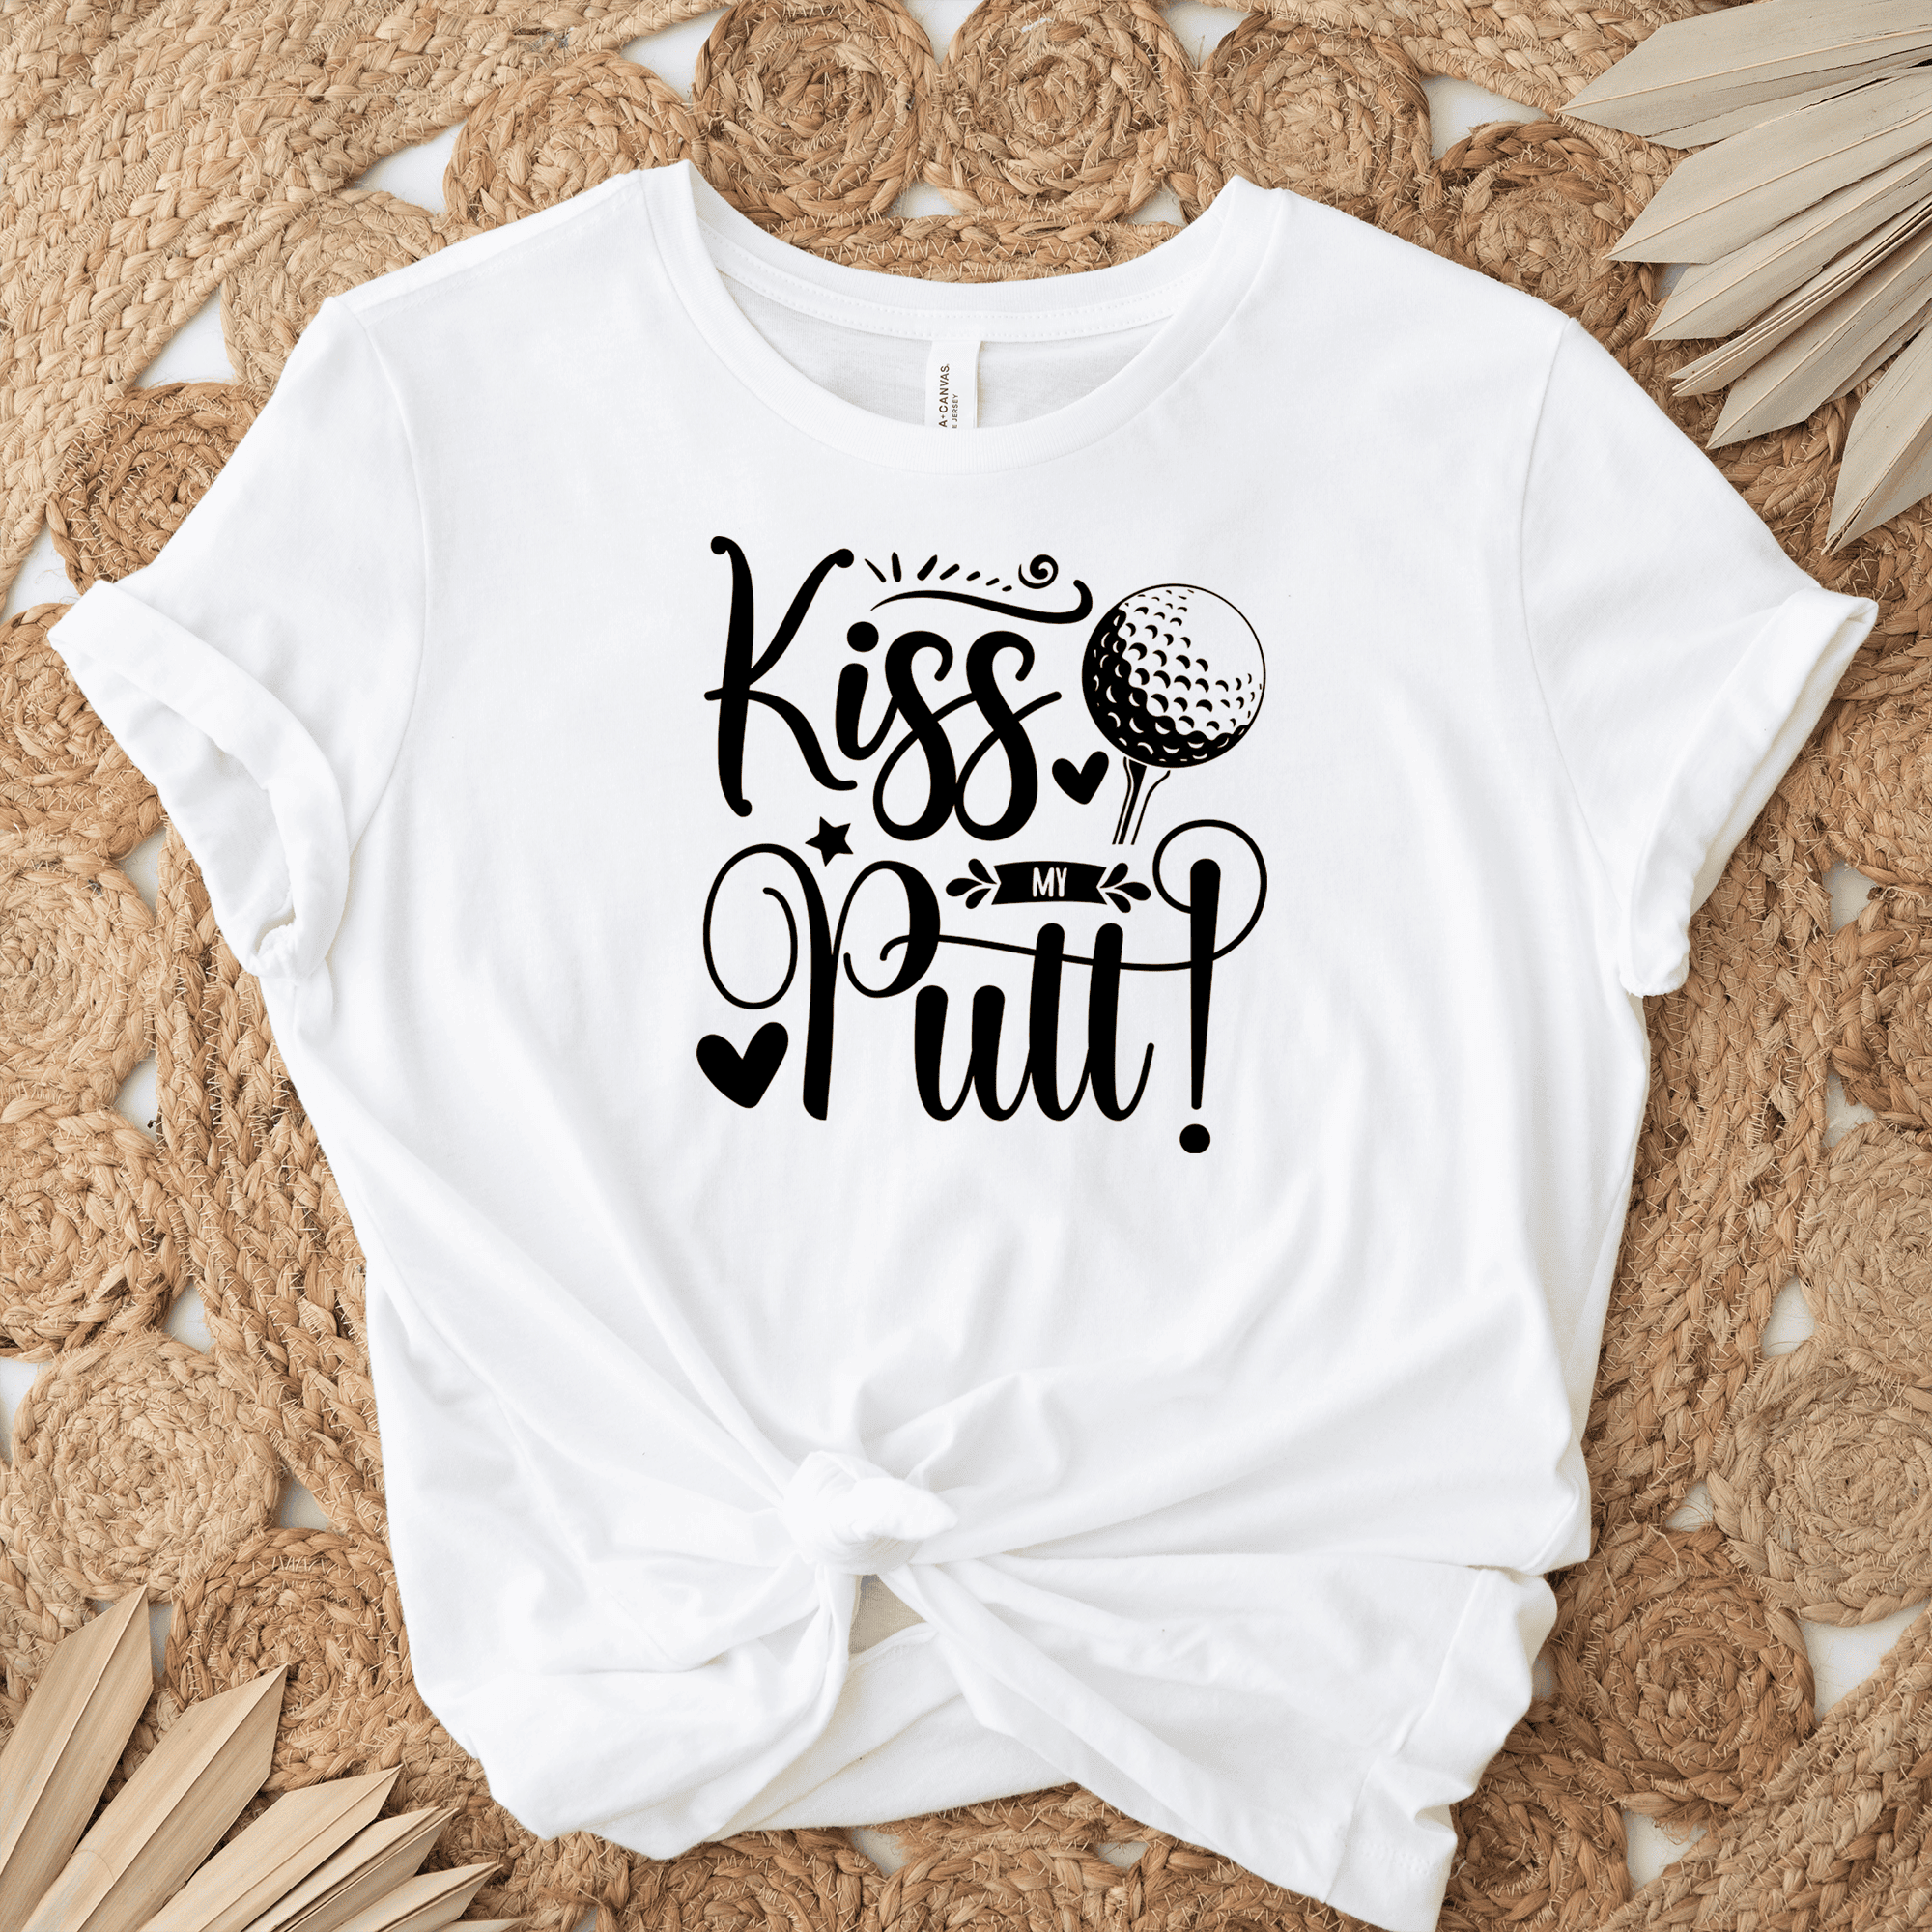 Womens White T Shirt with You-Can-Kiss-My-Putt design